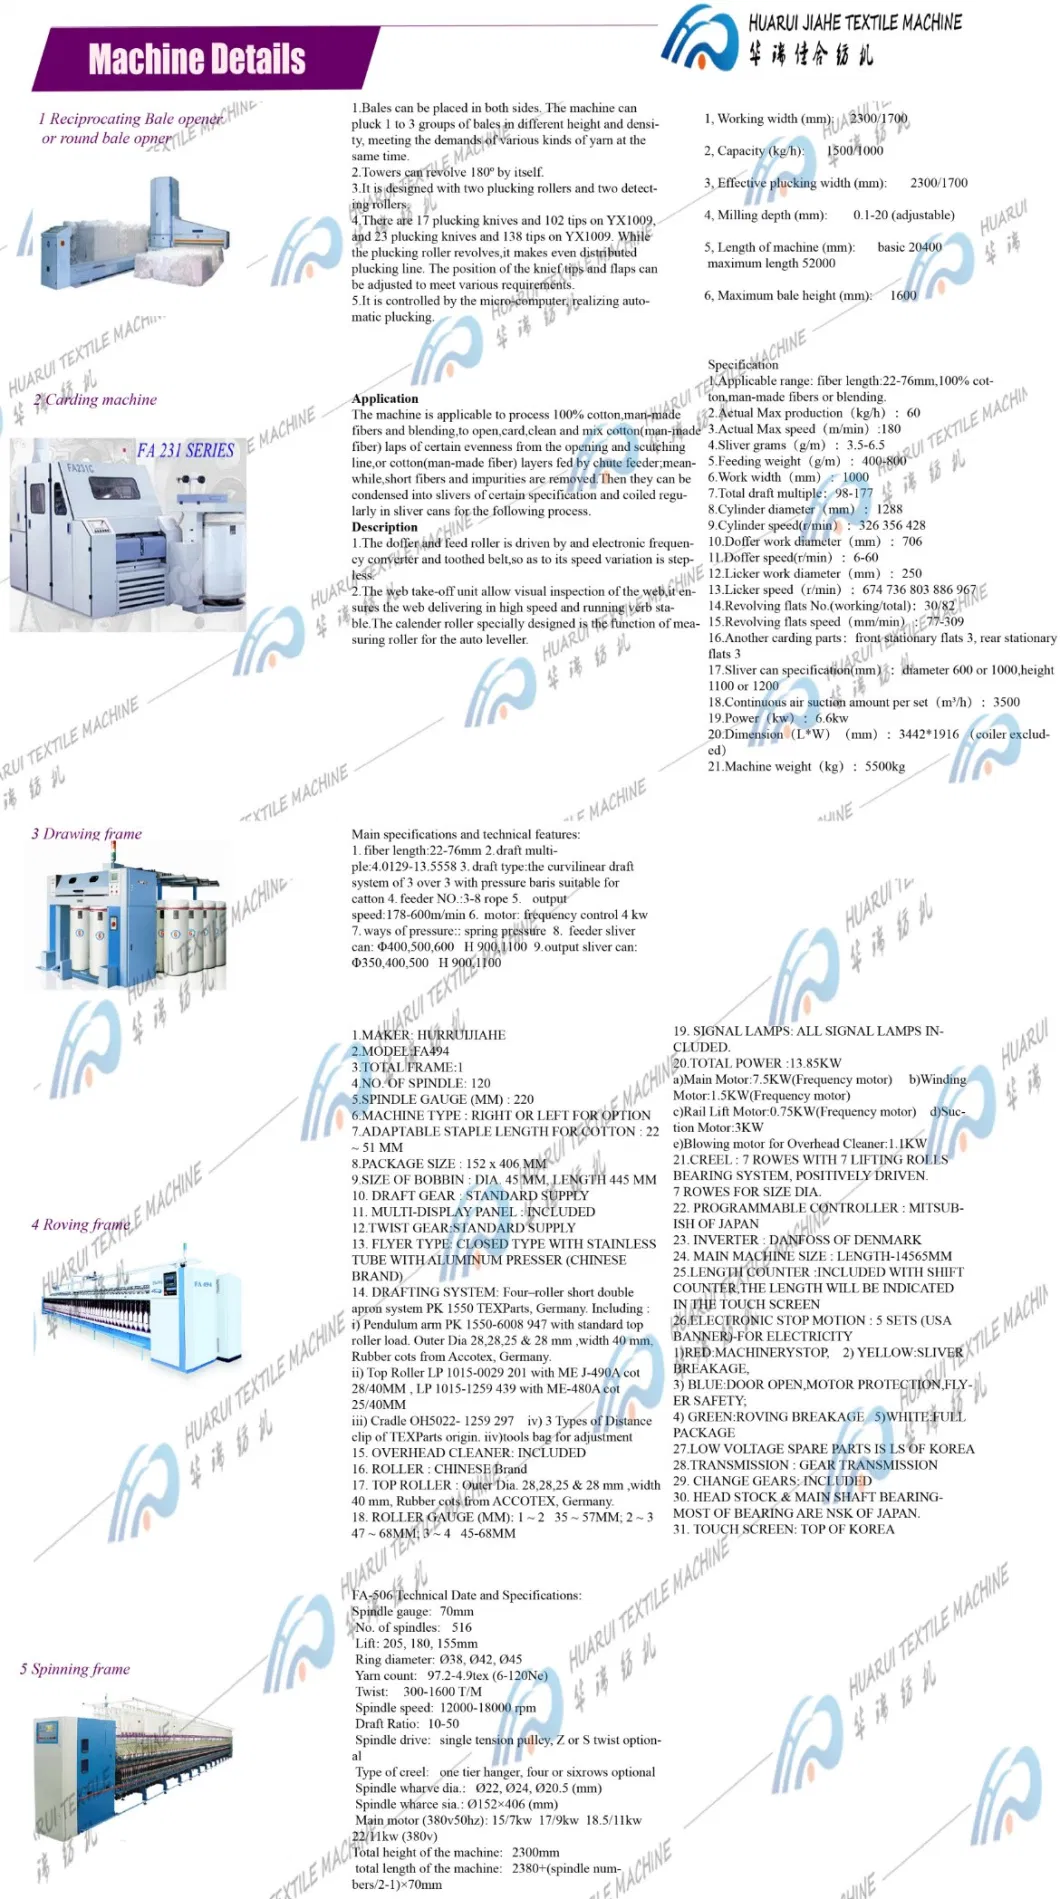 High-Temperature Hank Section Dyeing Machine, Vacuum Hank Section Dyeing Machine, Dyeing and Weaving Machinery Jig Dyeing Machine